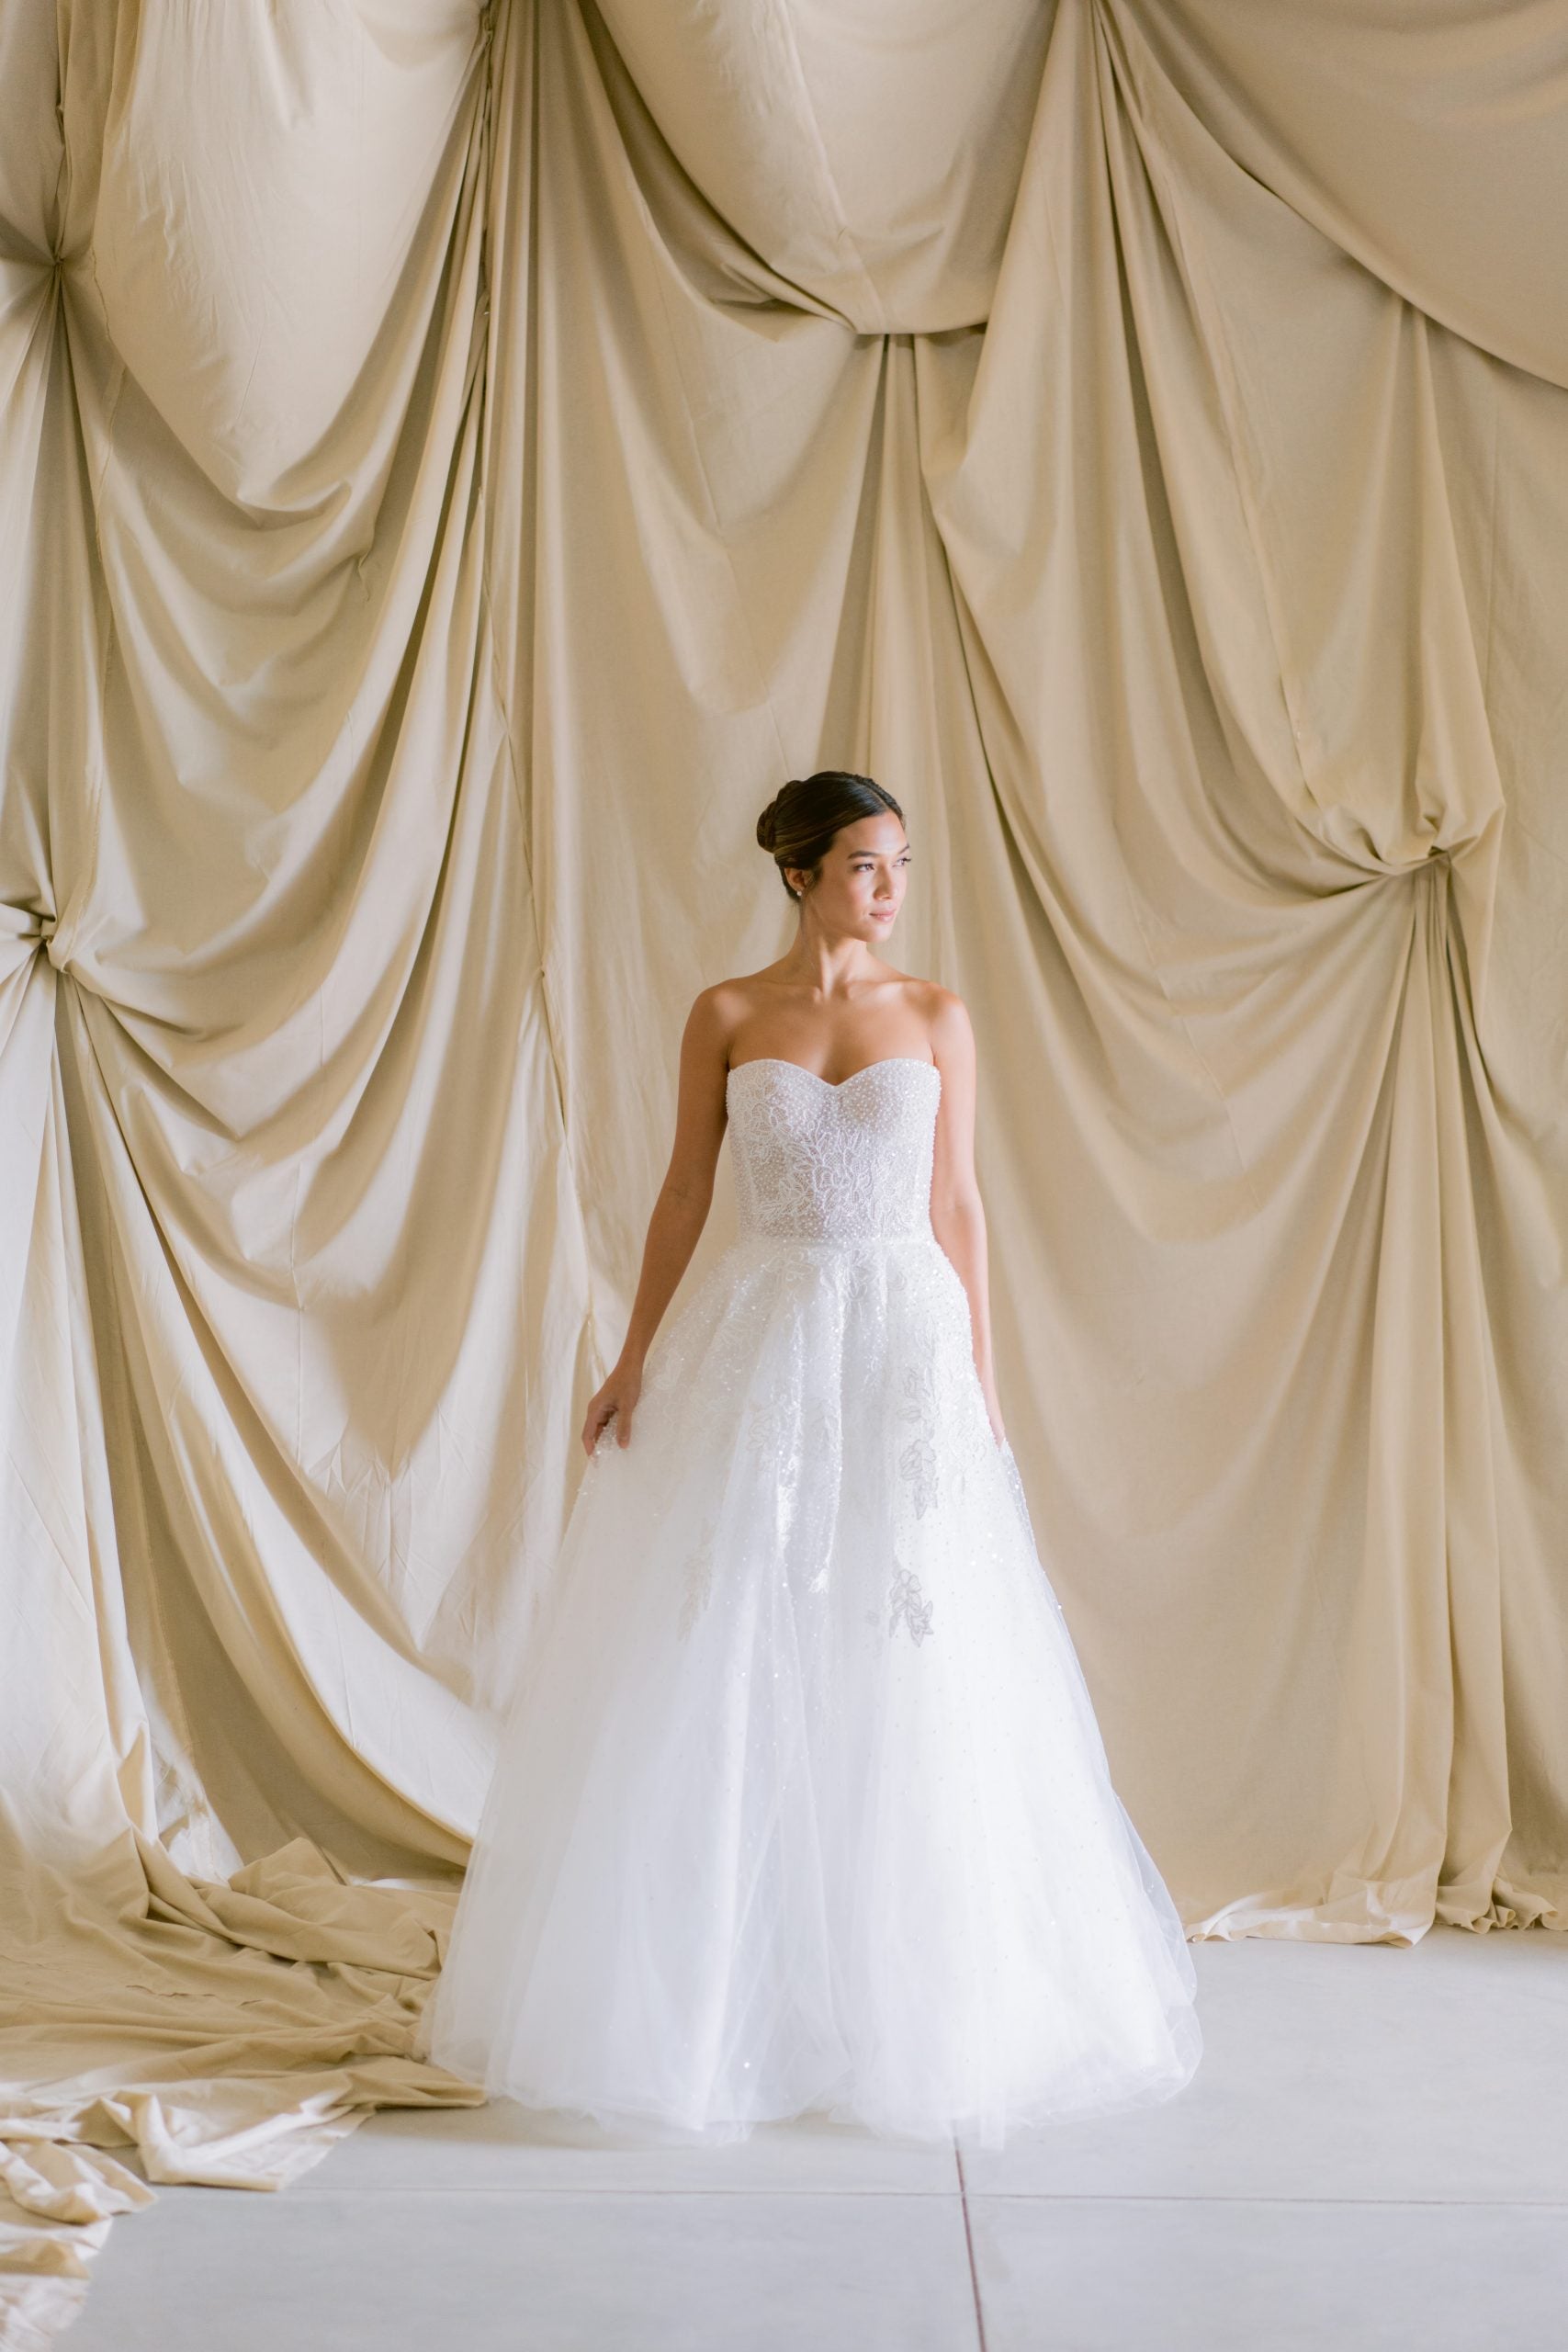 Finding The Perfect Wedding Gown - New Jersey Bride